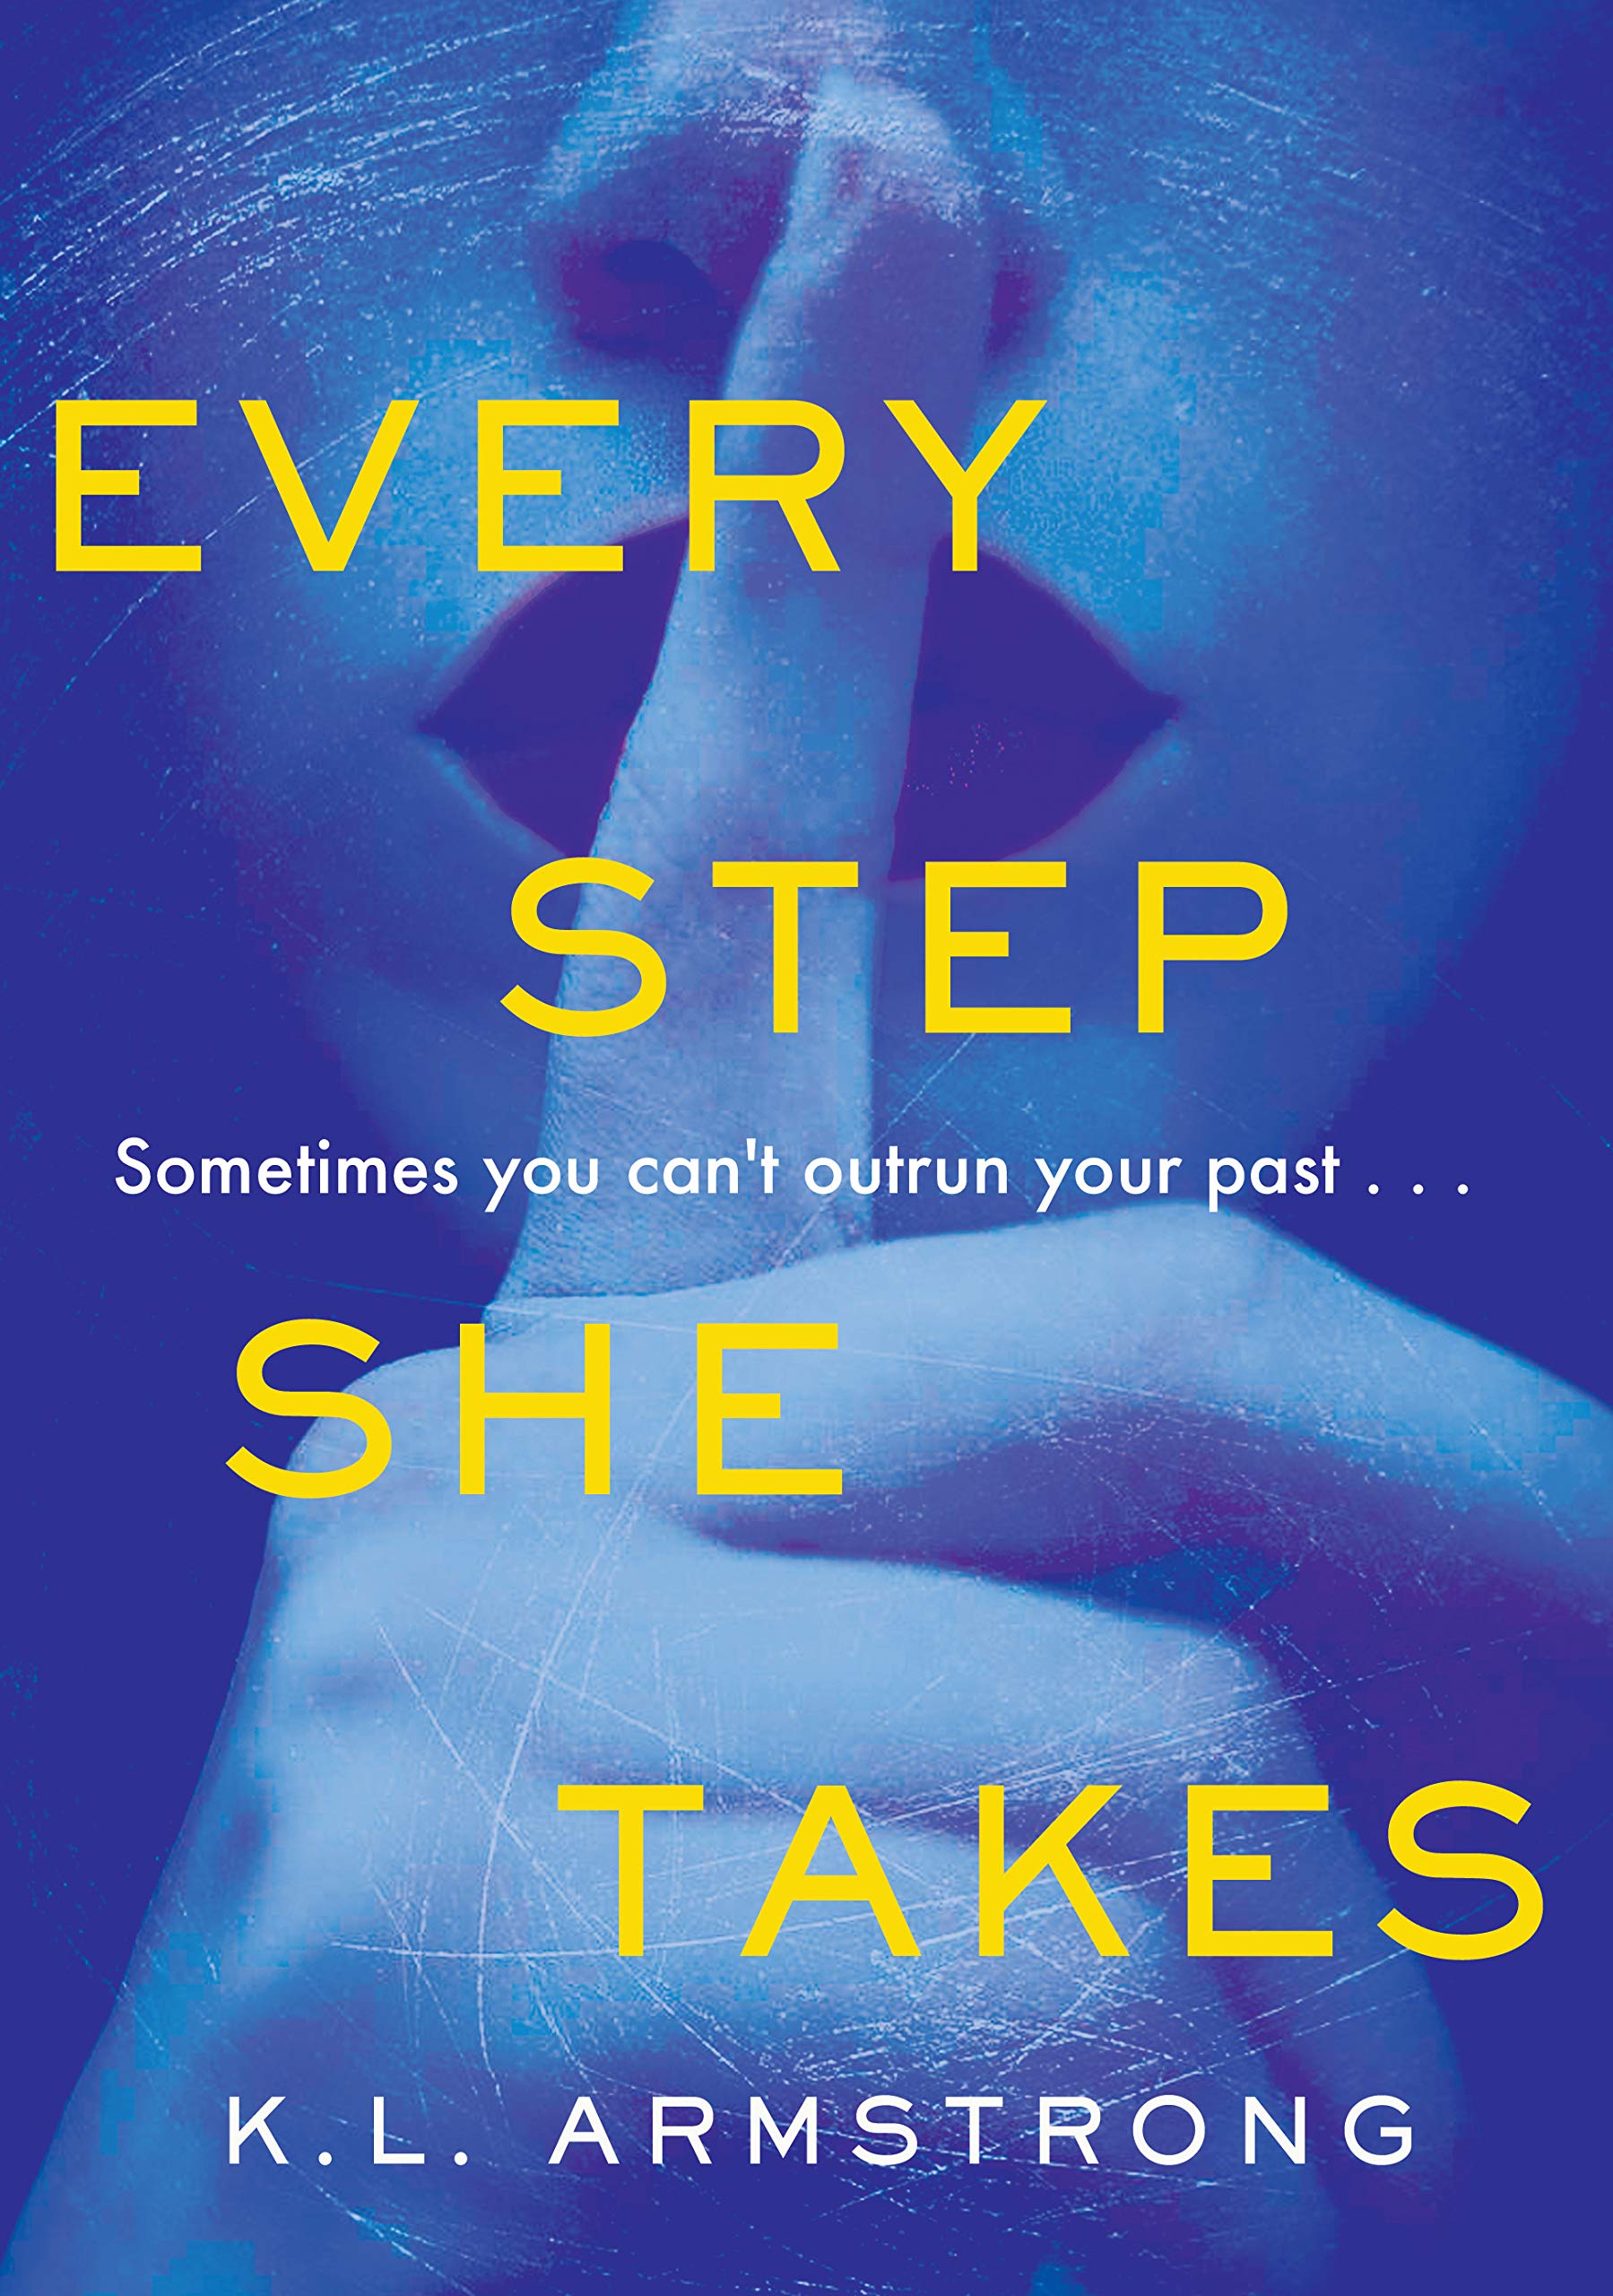 Book Cover of "Every Step She Takes" by K.L. Armstrong.